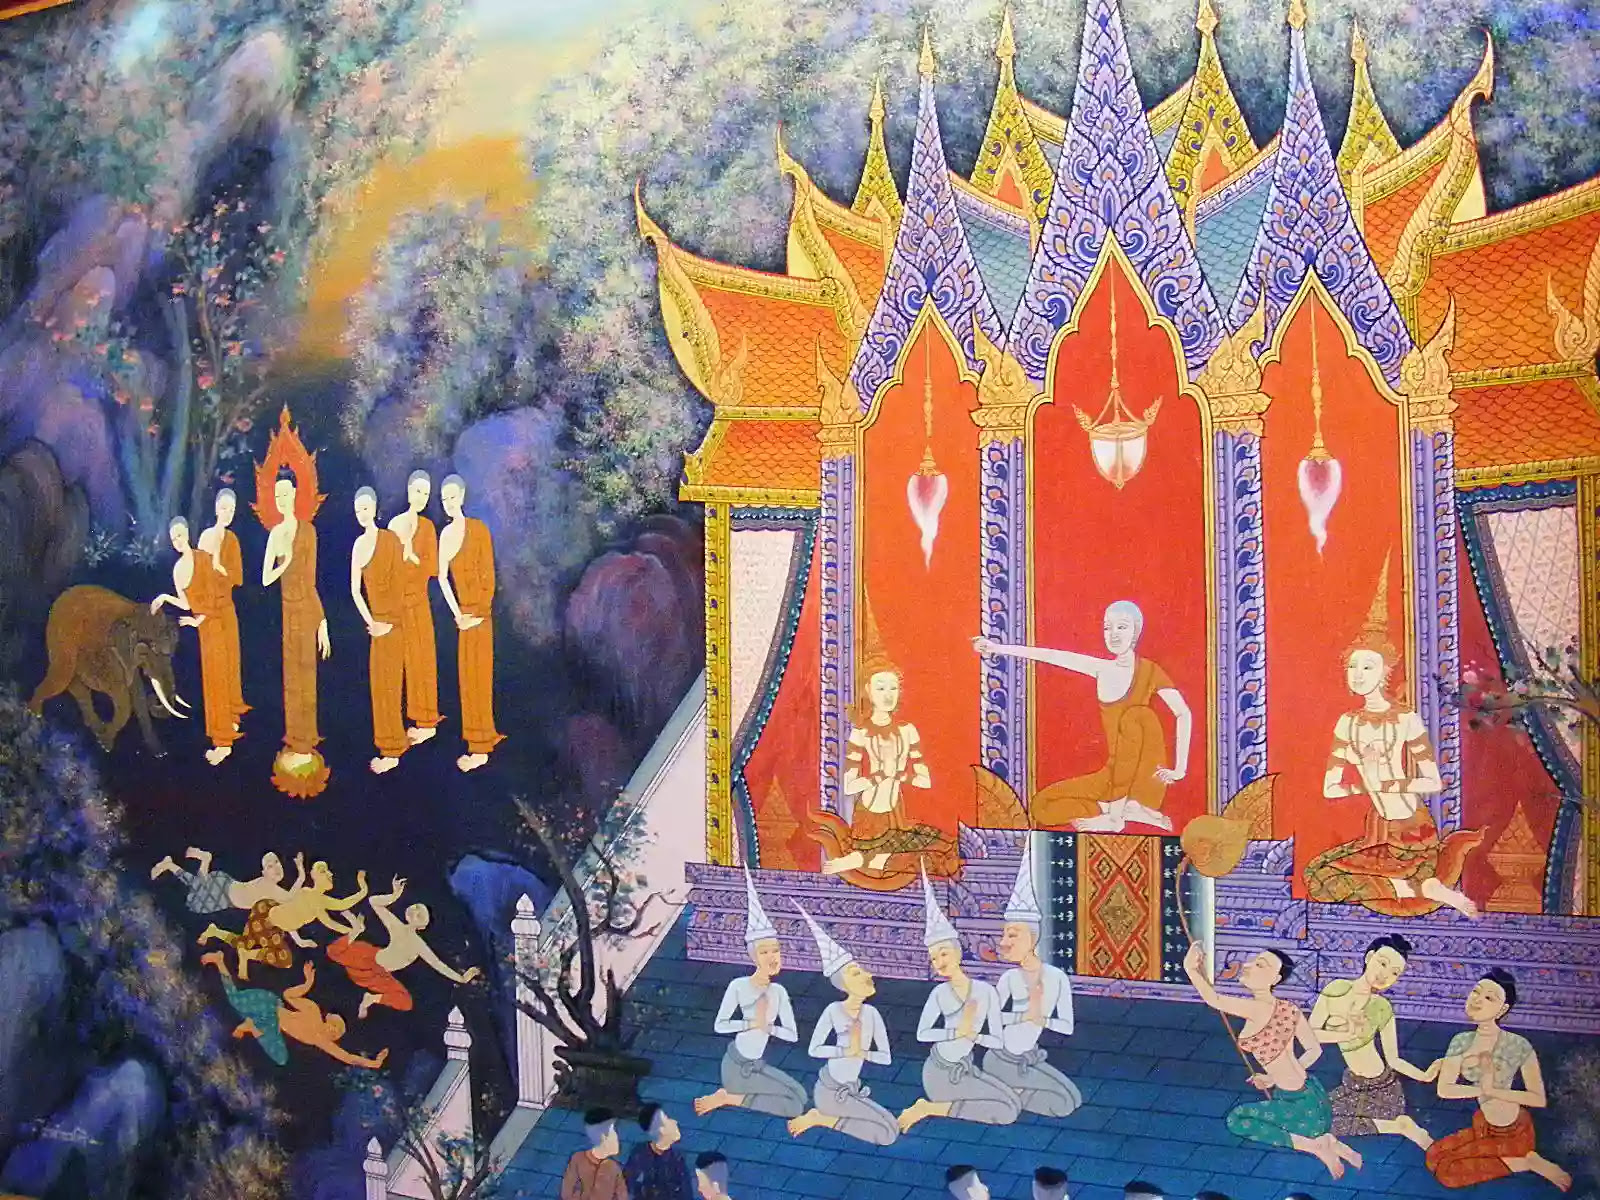 Painting of Devadatta in a temple with deciples.